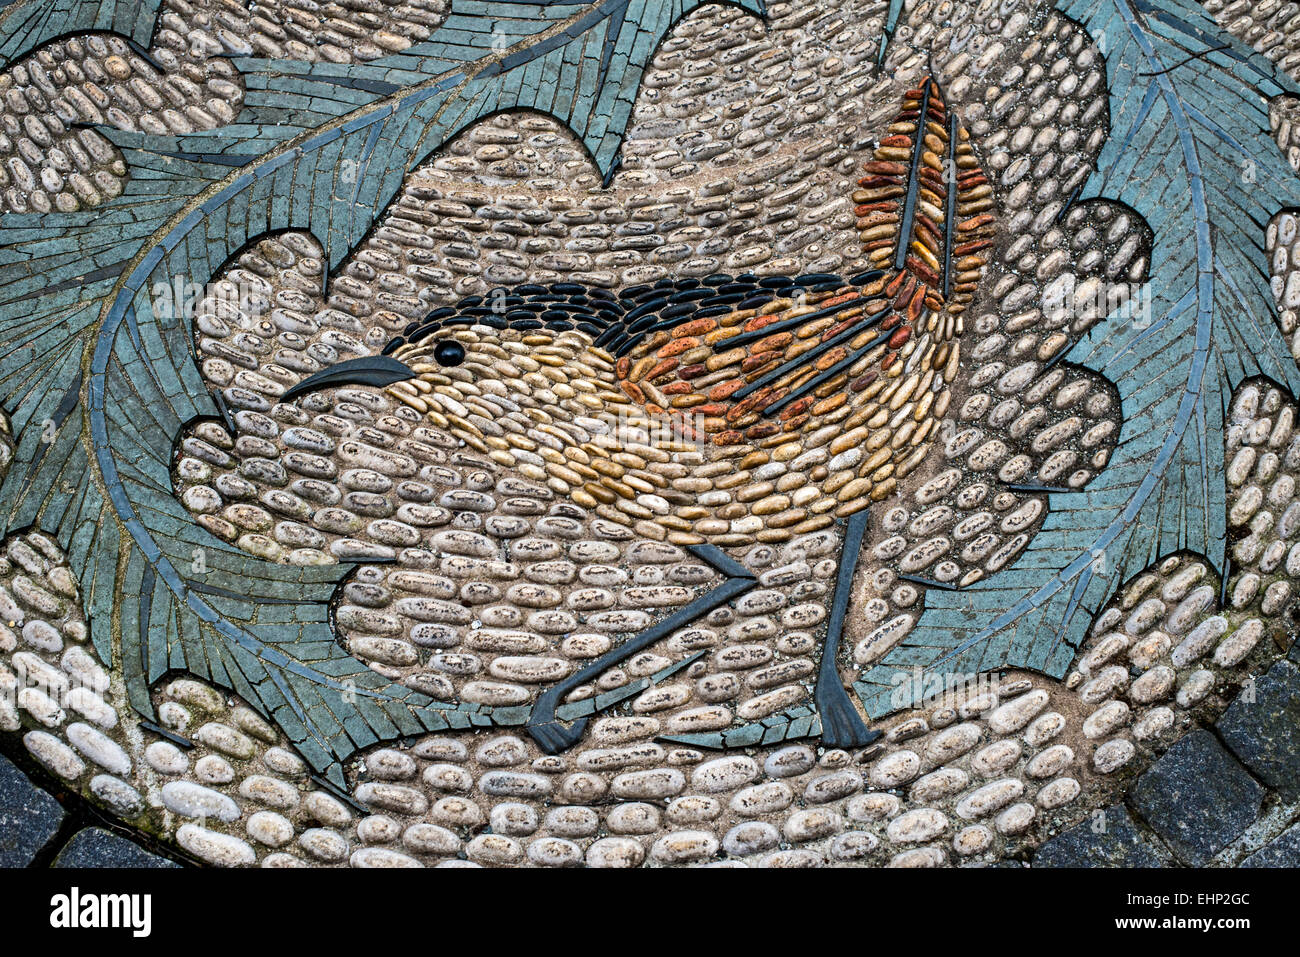 A mosaic of pebbles depicting a bird on a thistle in Queen Street, Edinburgh, Scotland, UK. Stock Photo